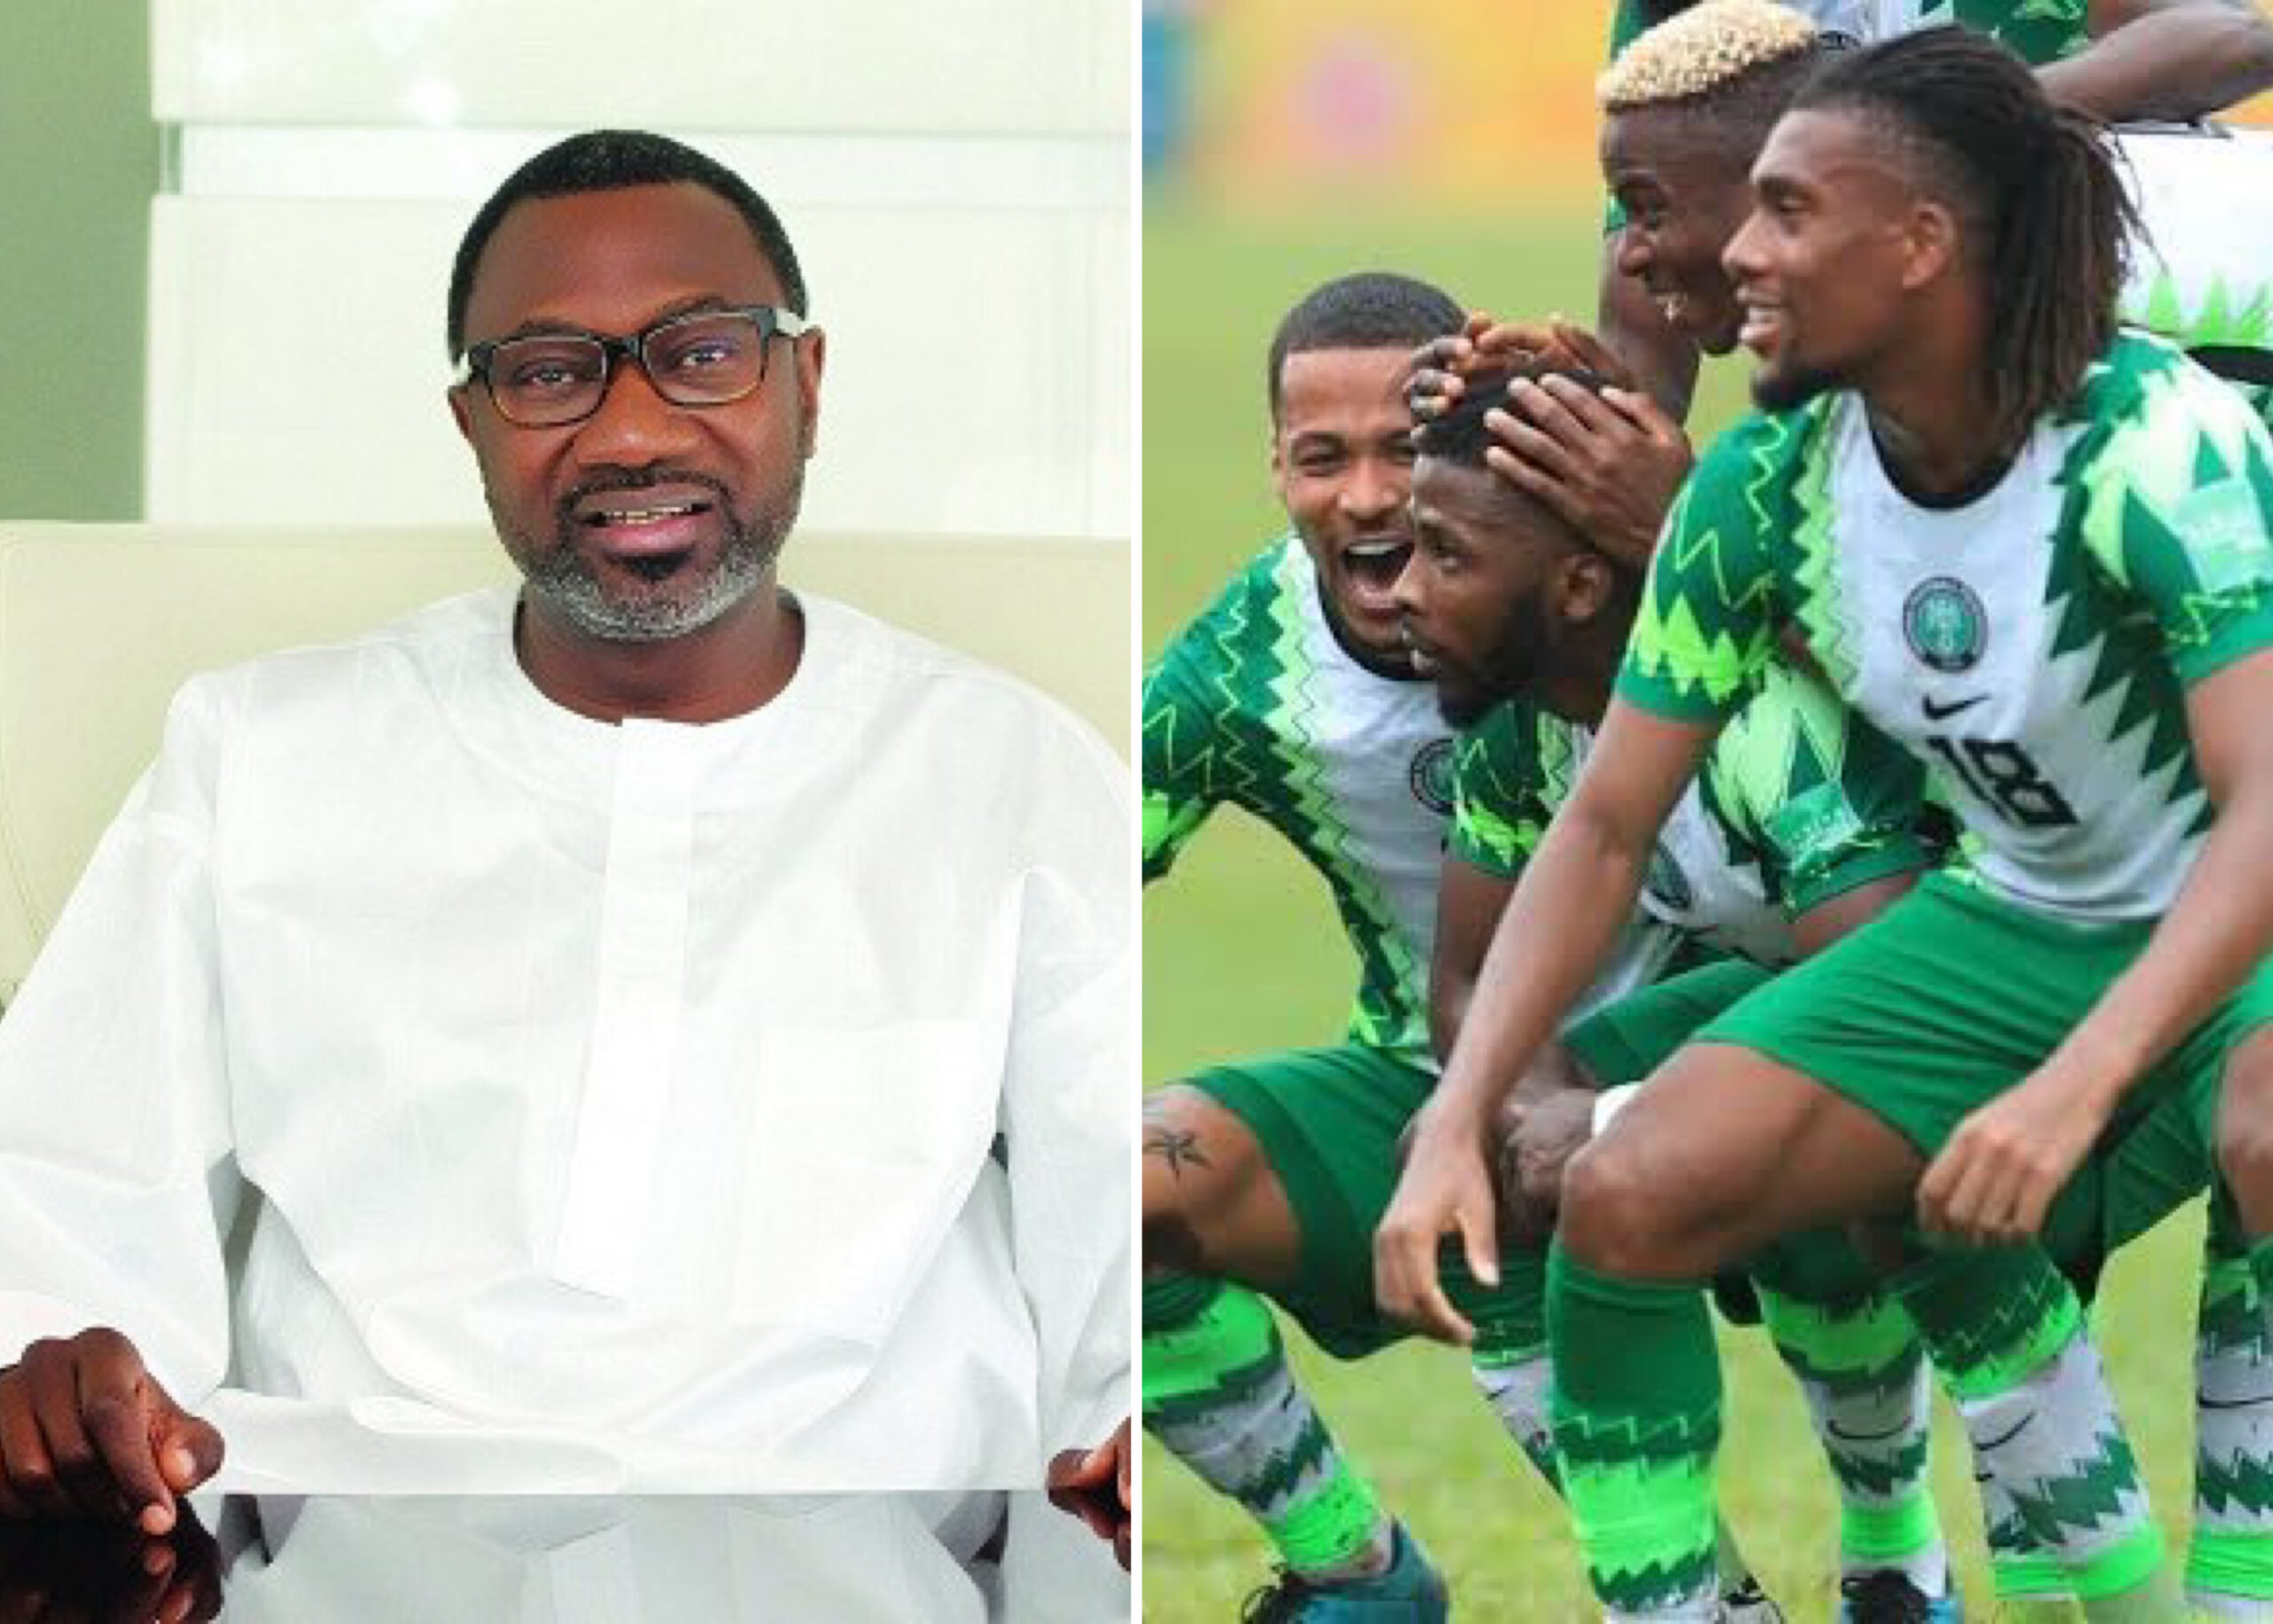 Billionaire, Femi Otedola Promises To Give Super Eagles $250,000 If They Win AFCON 2021